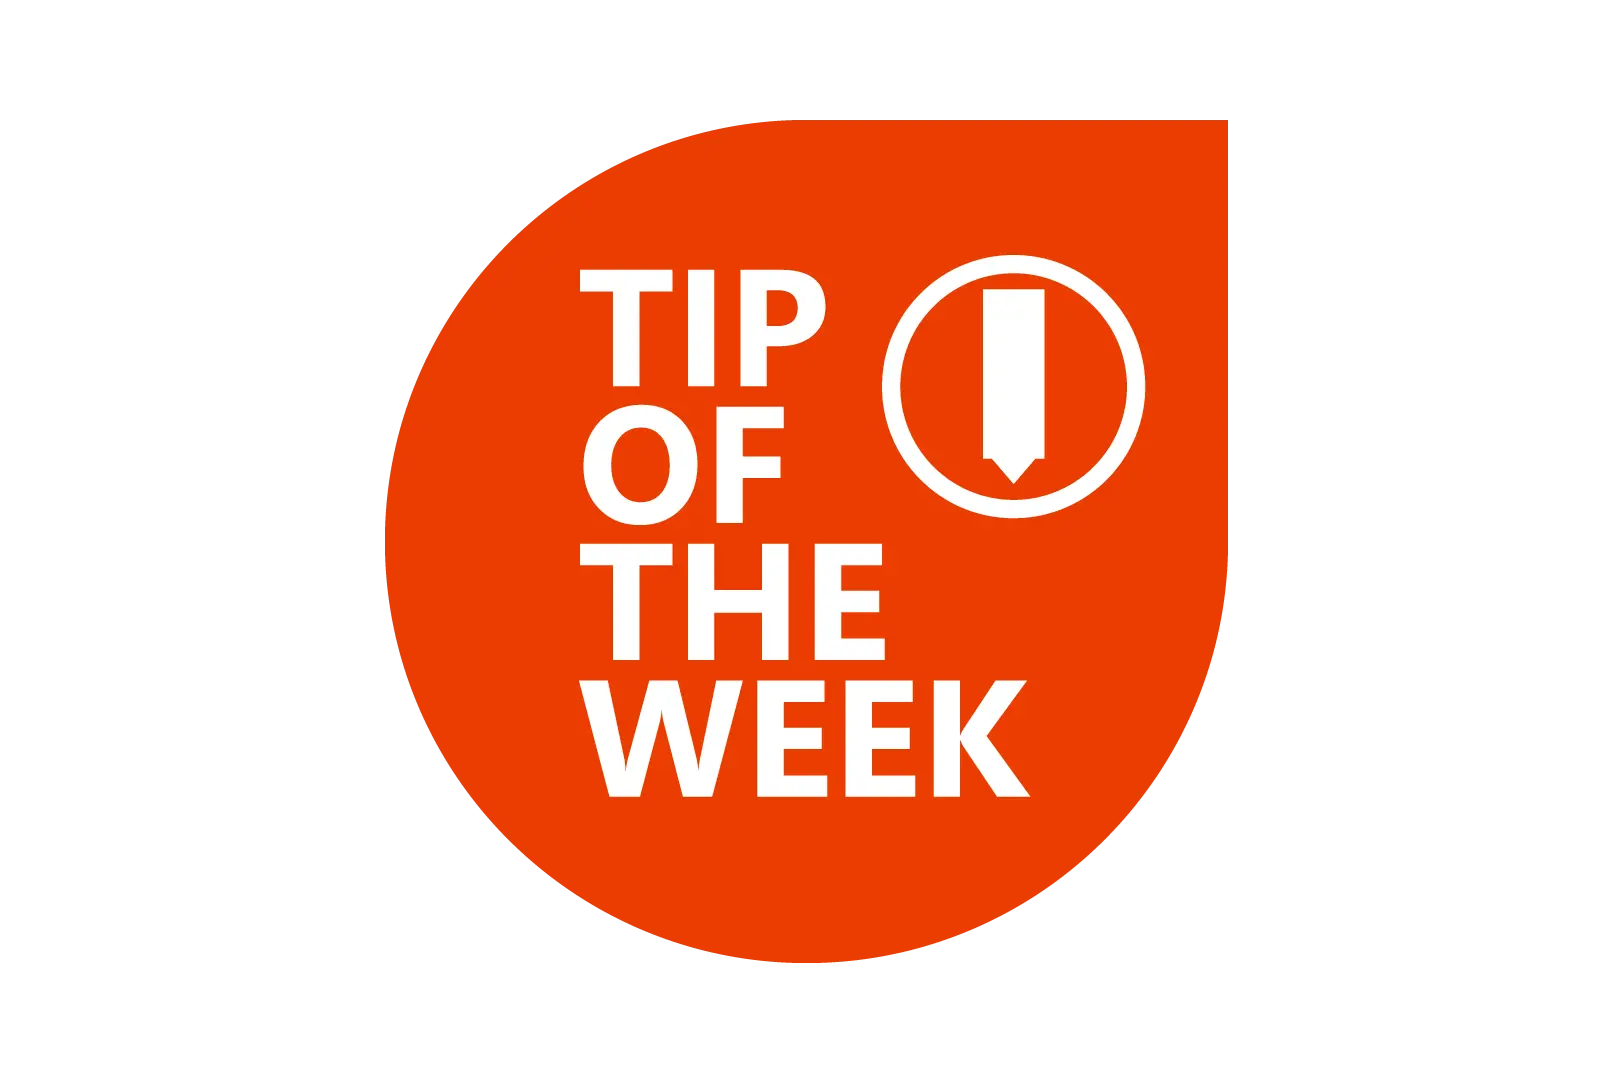 TIP-OF-THE-WEEK #5 SharePoint Online